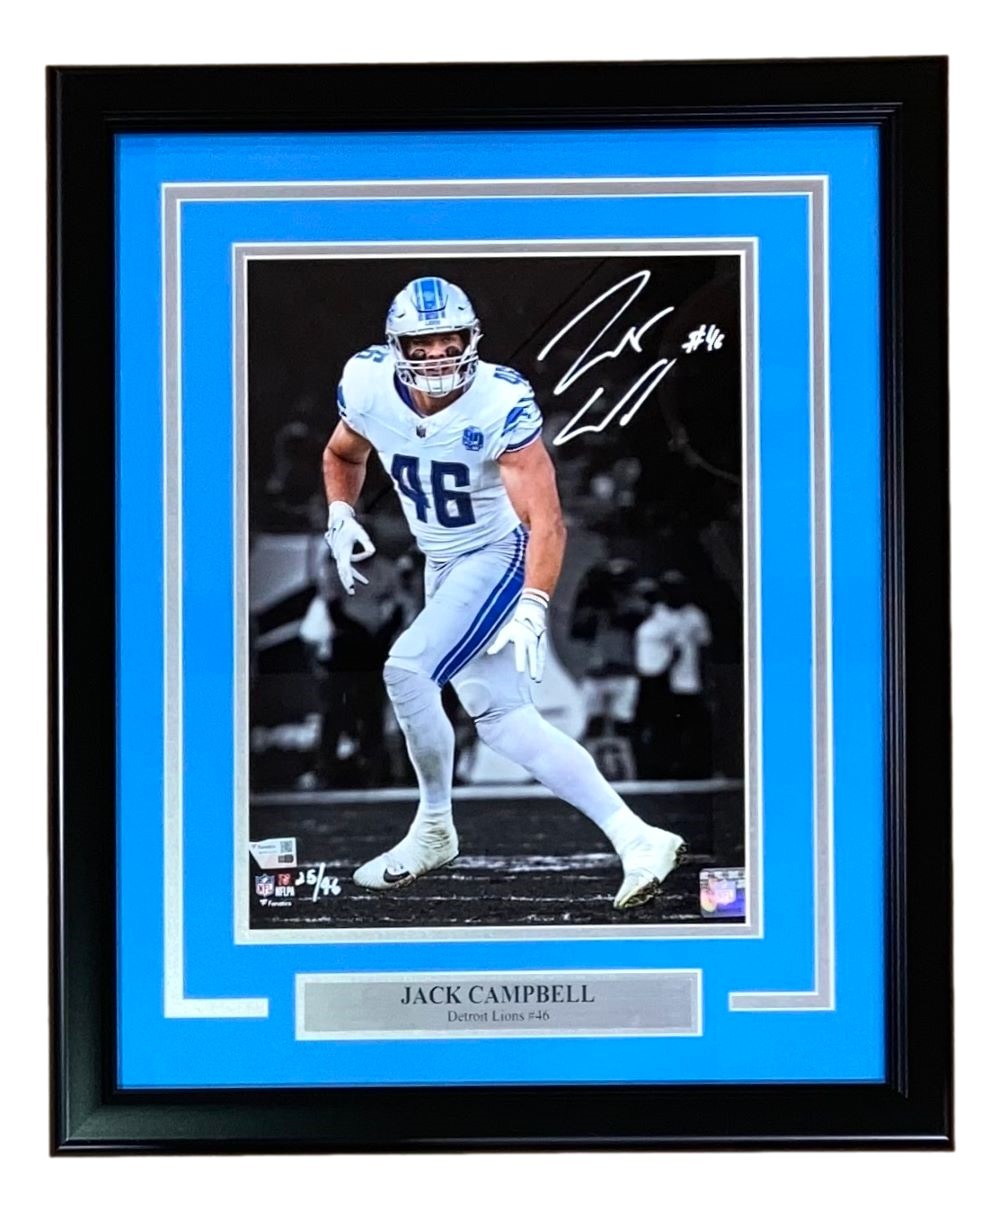 Primary image for Jack Campbell Signed Framed 11x14 Detroit Lions Photo Fanatics